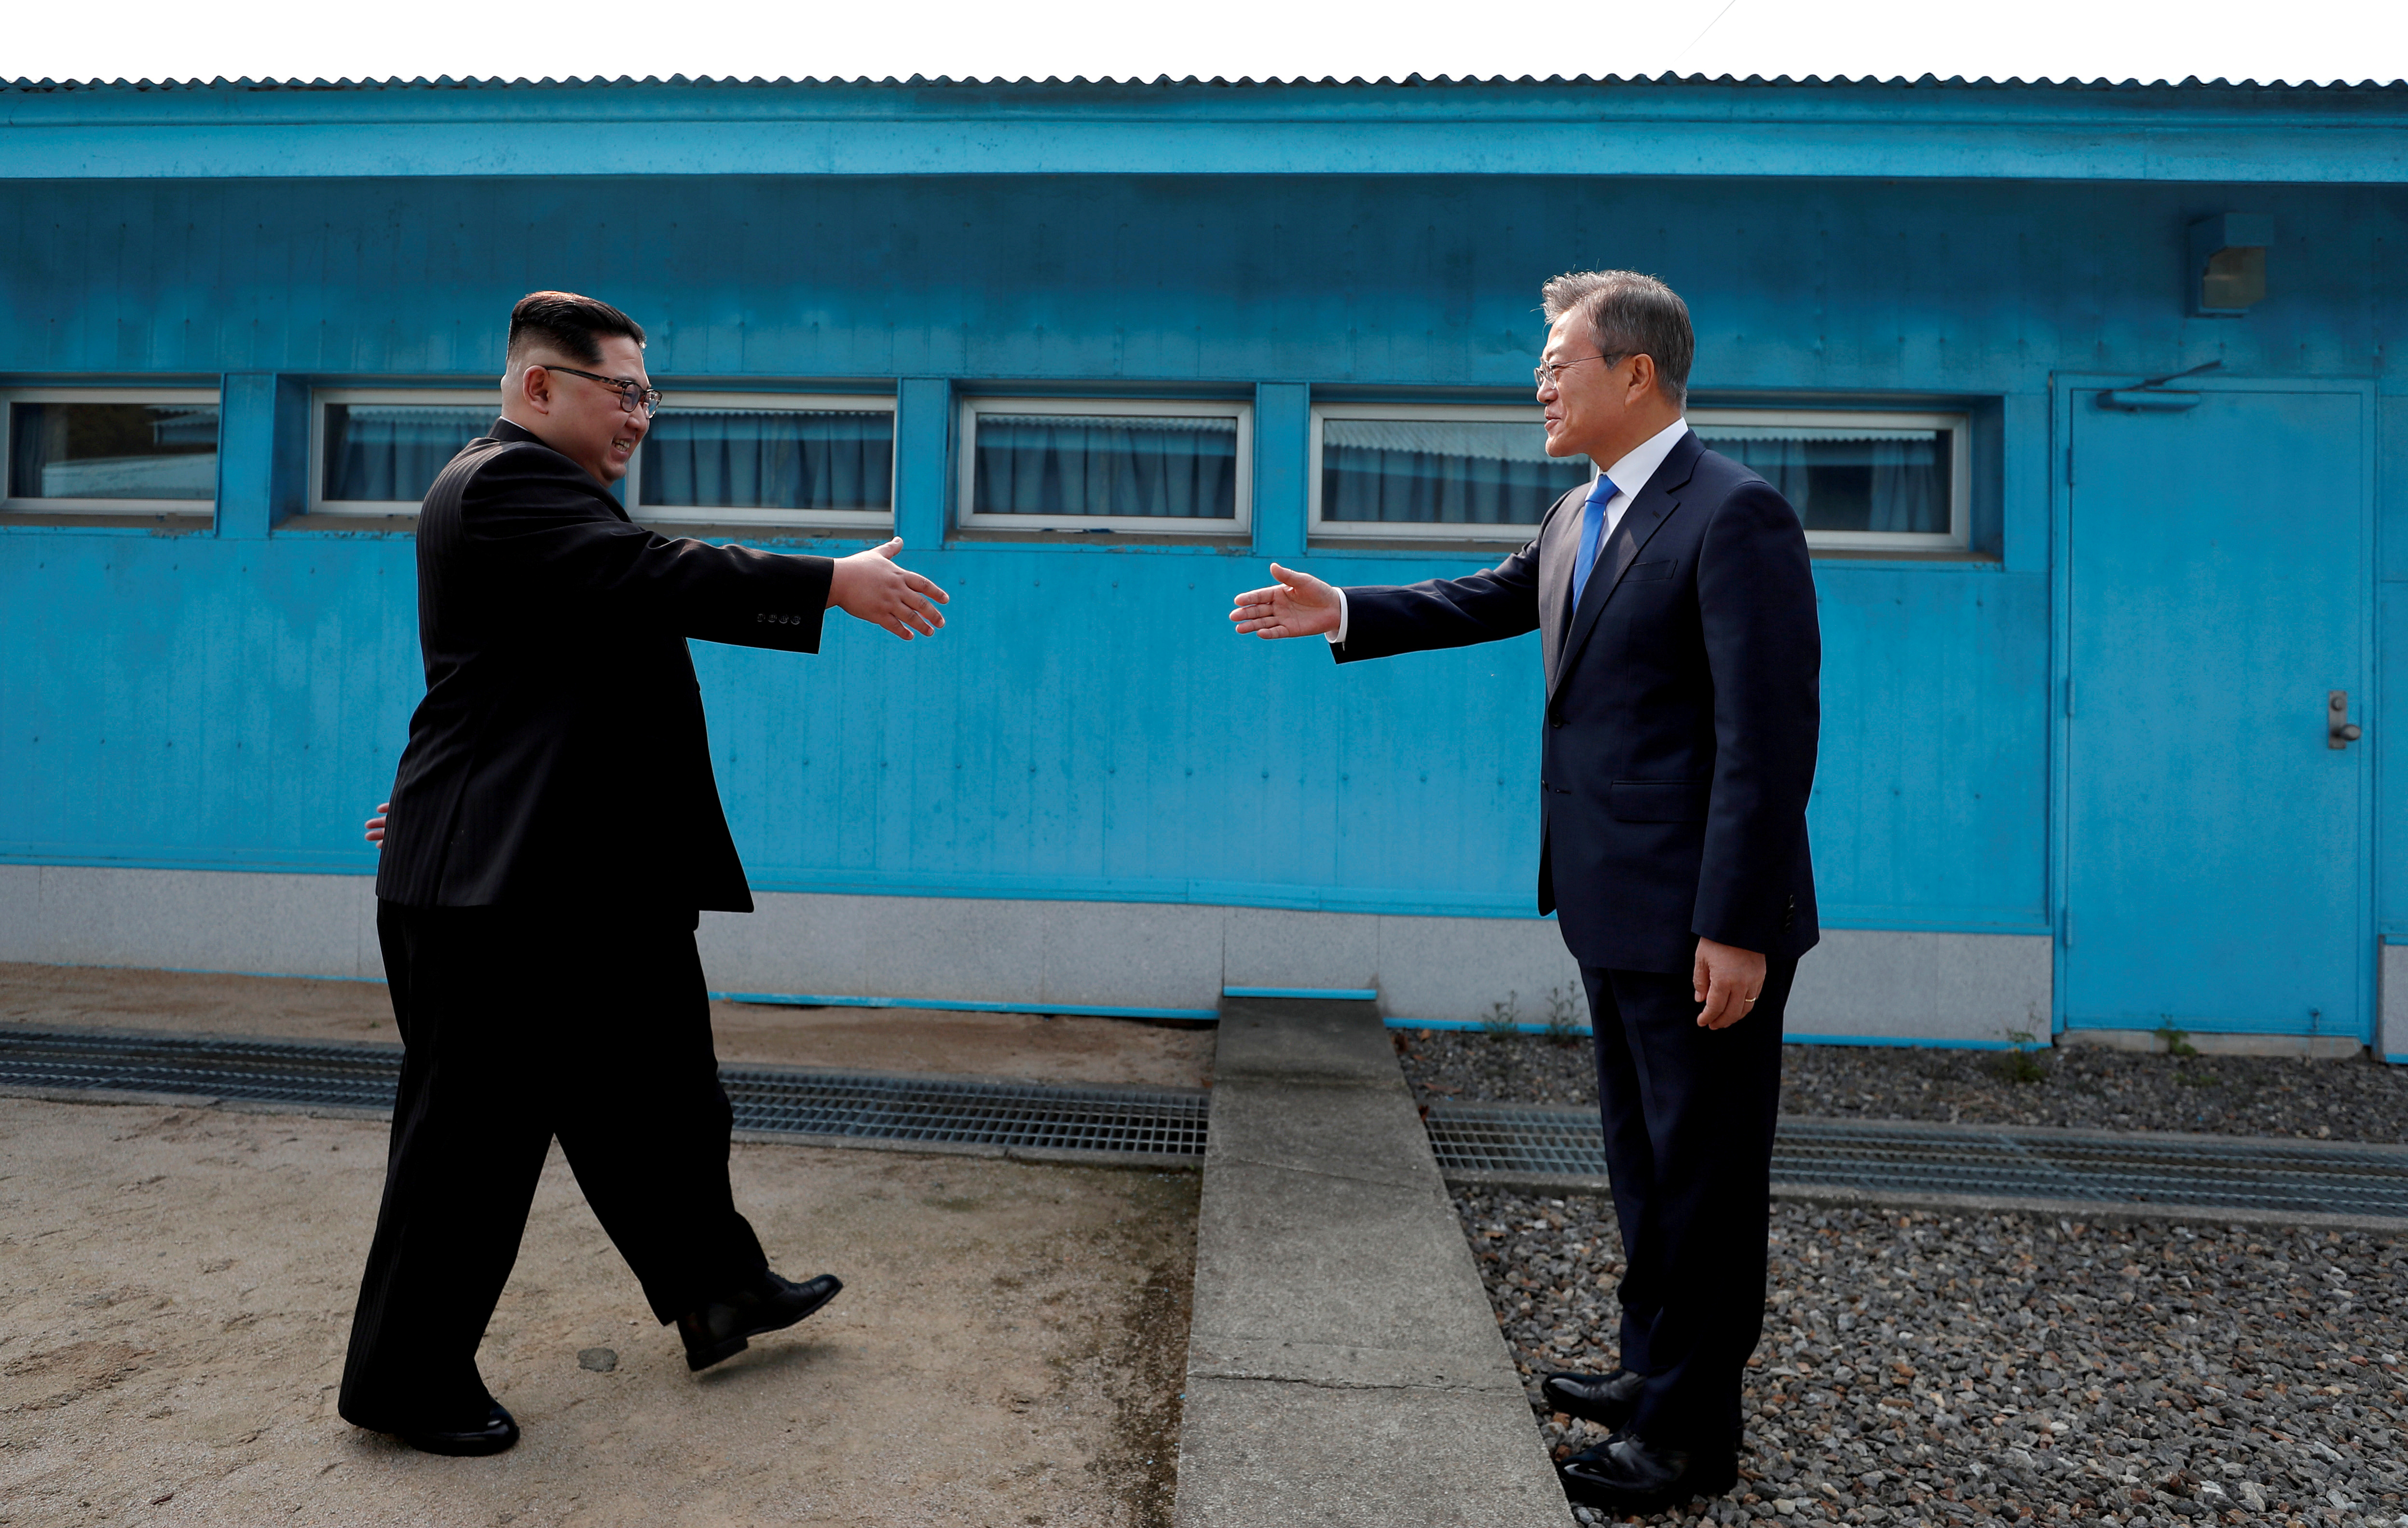 South Korean President Moon Jae-in and North Korean leader Kim Jong Un shake hands at the truce village of Panmunjom inside the demilitarized zone separating the two Koreas